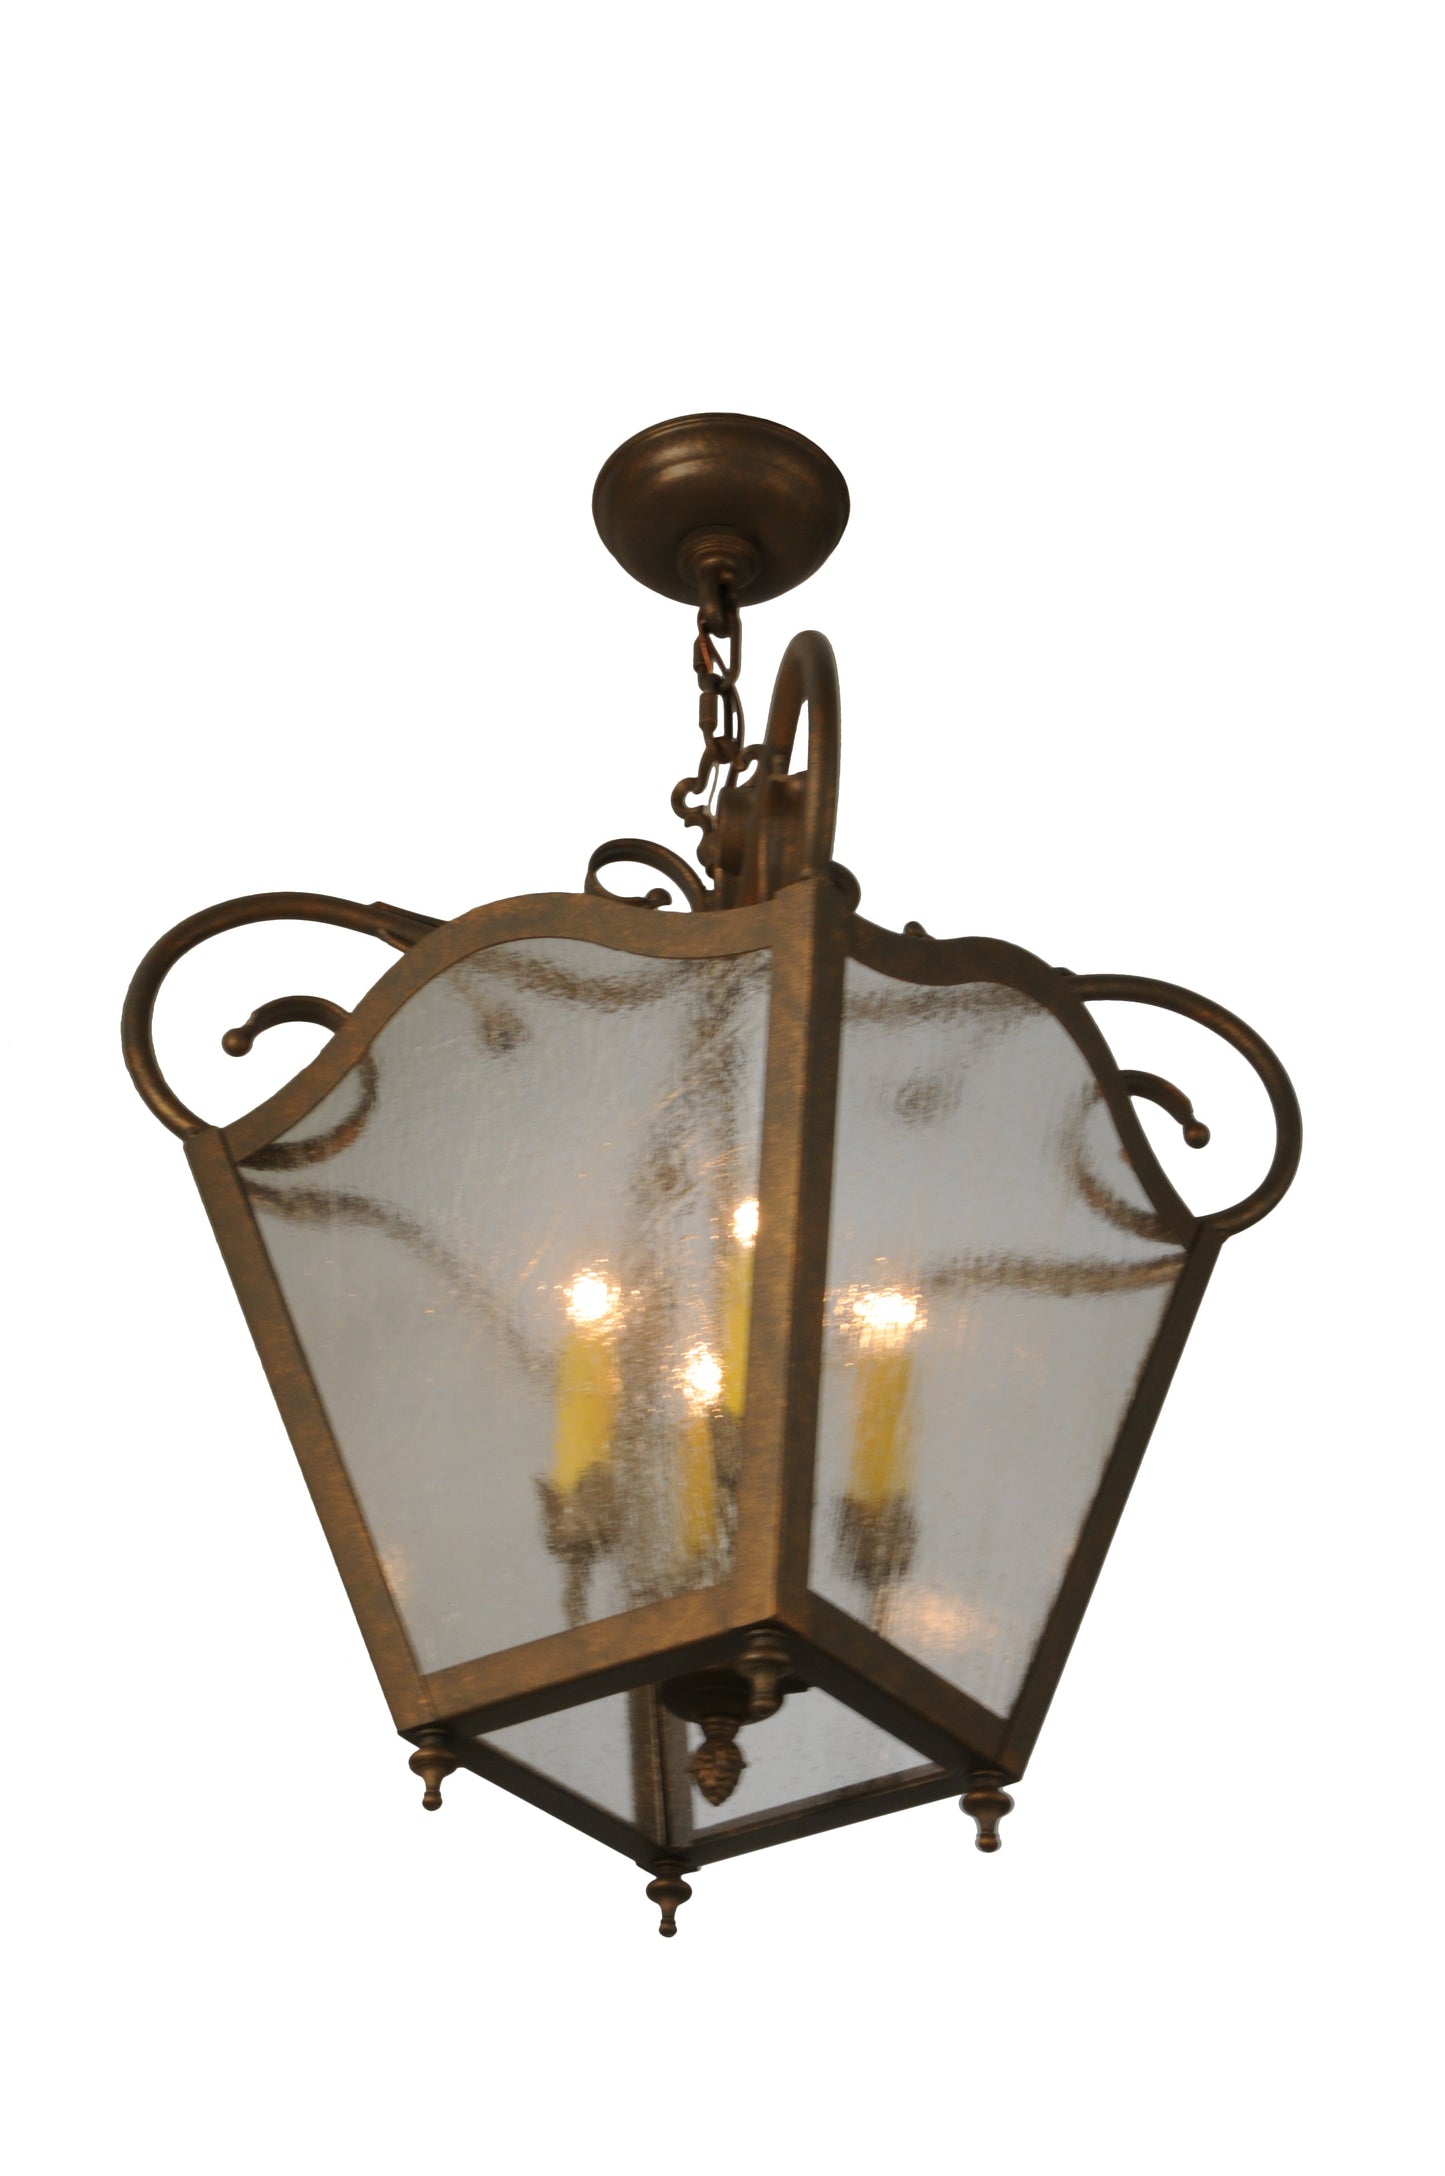 16" Square Terena 4-Light Pendant by 2nd Ave Lighting